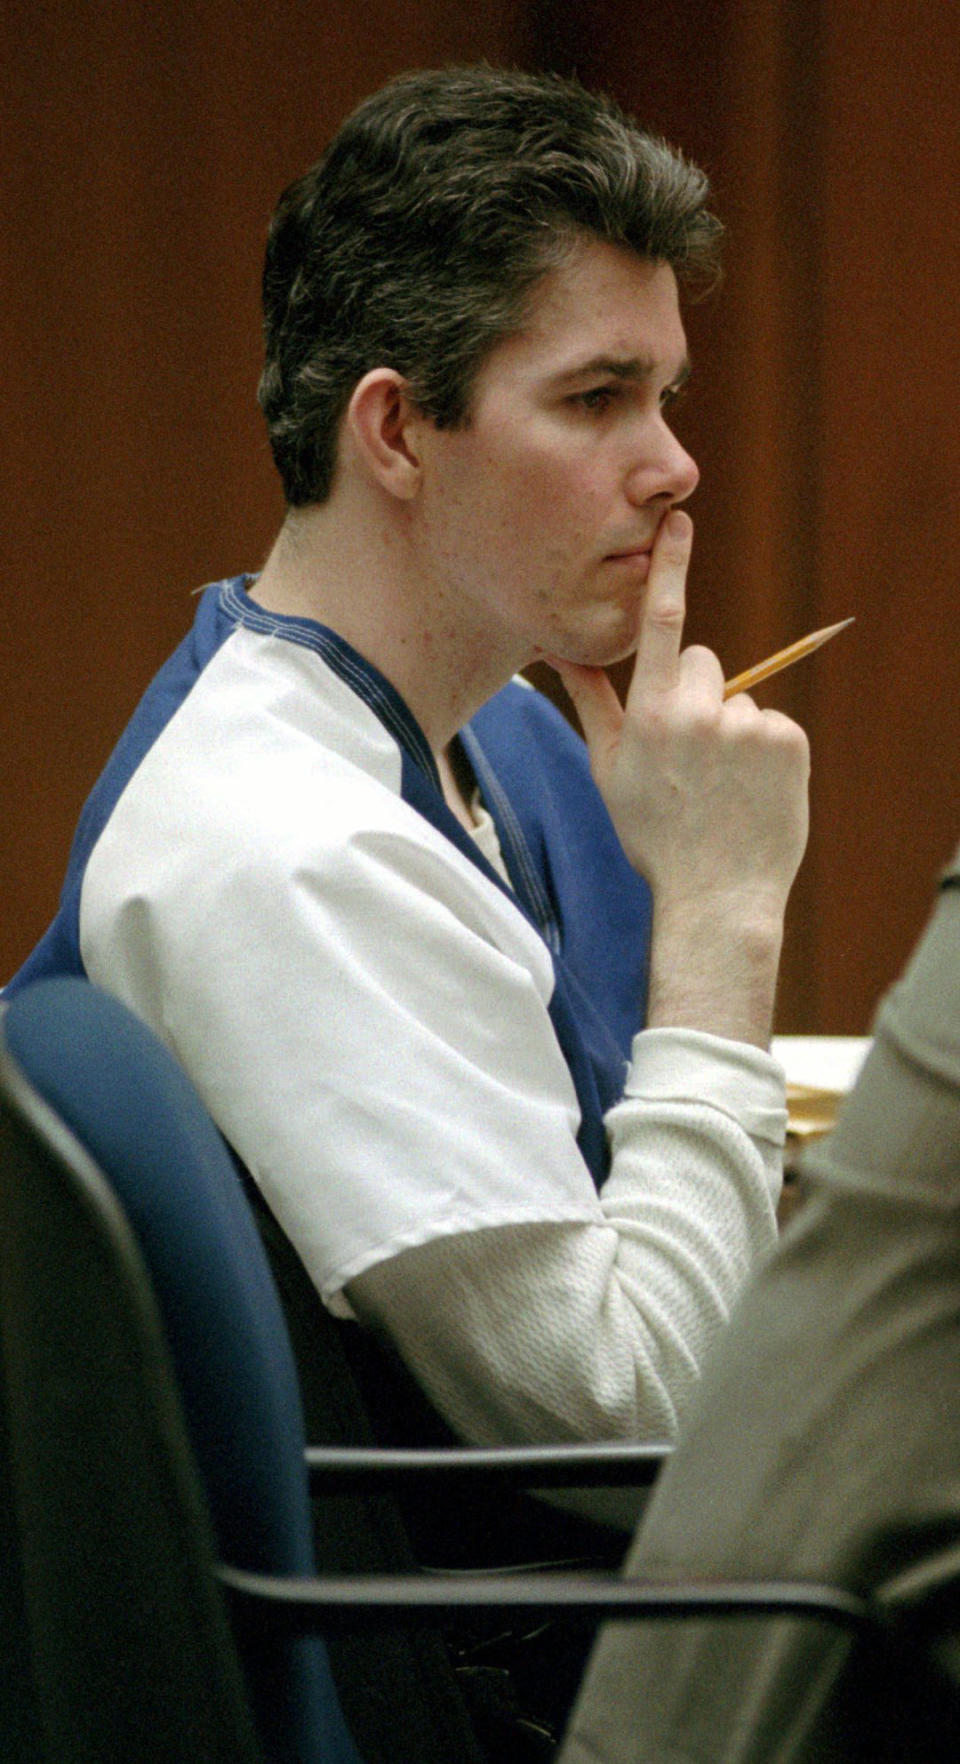 File - In this April 30, 1996, file photo, Joe Hunt, former leader of the Billionaire Boys Club, sits in court in Los Angeles during a habeas corpus hearing. The founder of the infamous Billionaire Boys Club who is serving a life sentence for murder is appealing to California Gov. Jerry Brown for a chance at freedom. (AP Photo/Nick Ut, File)